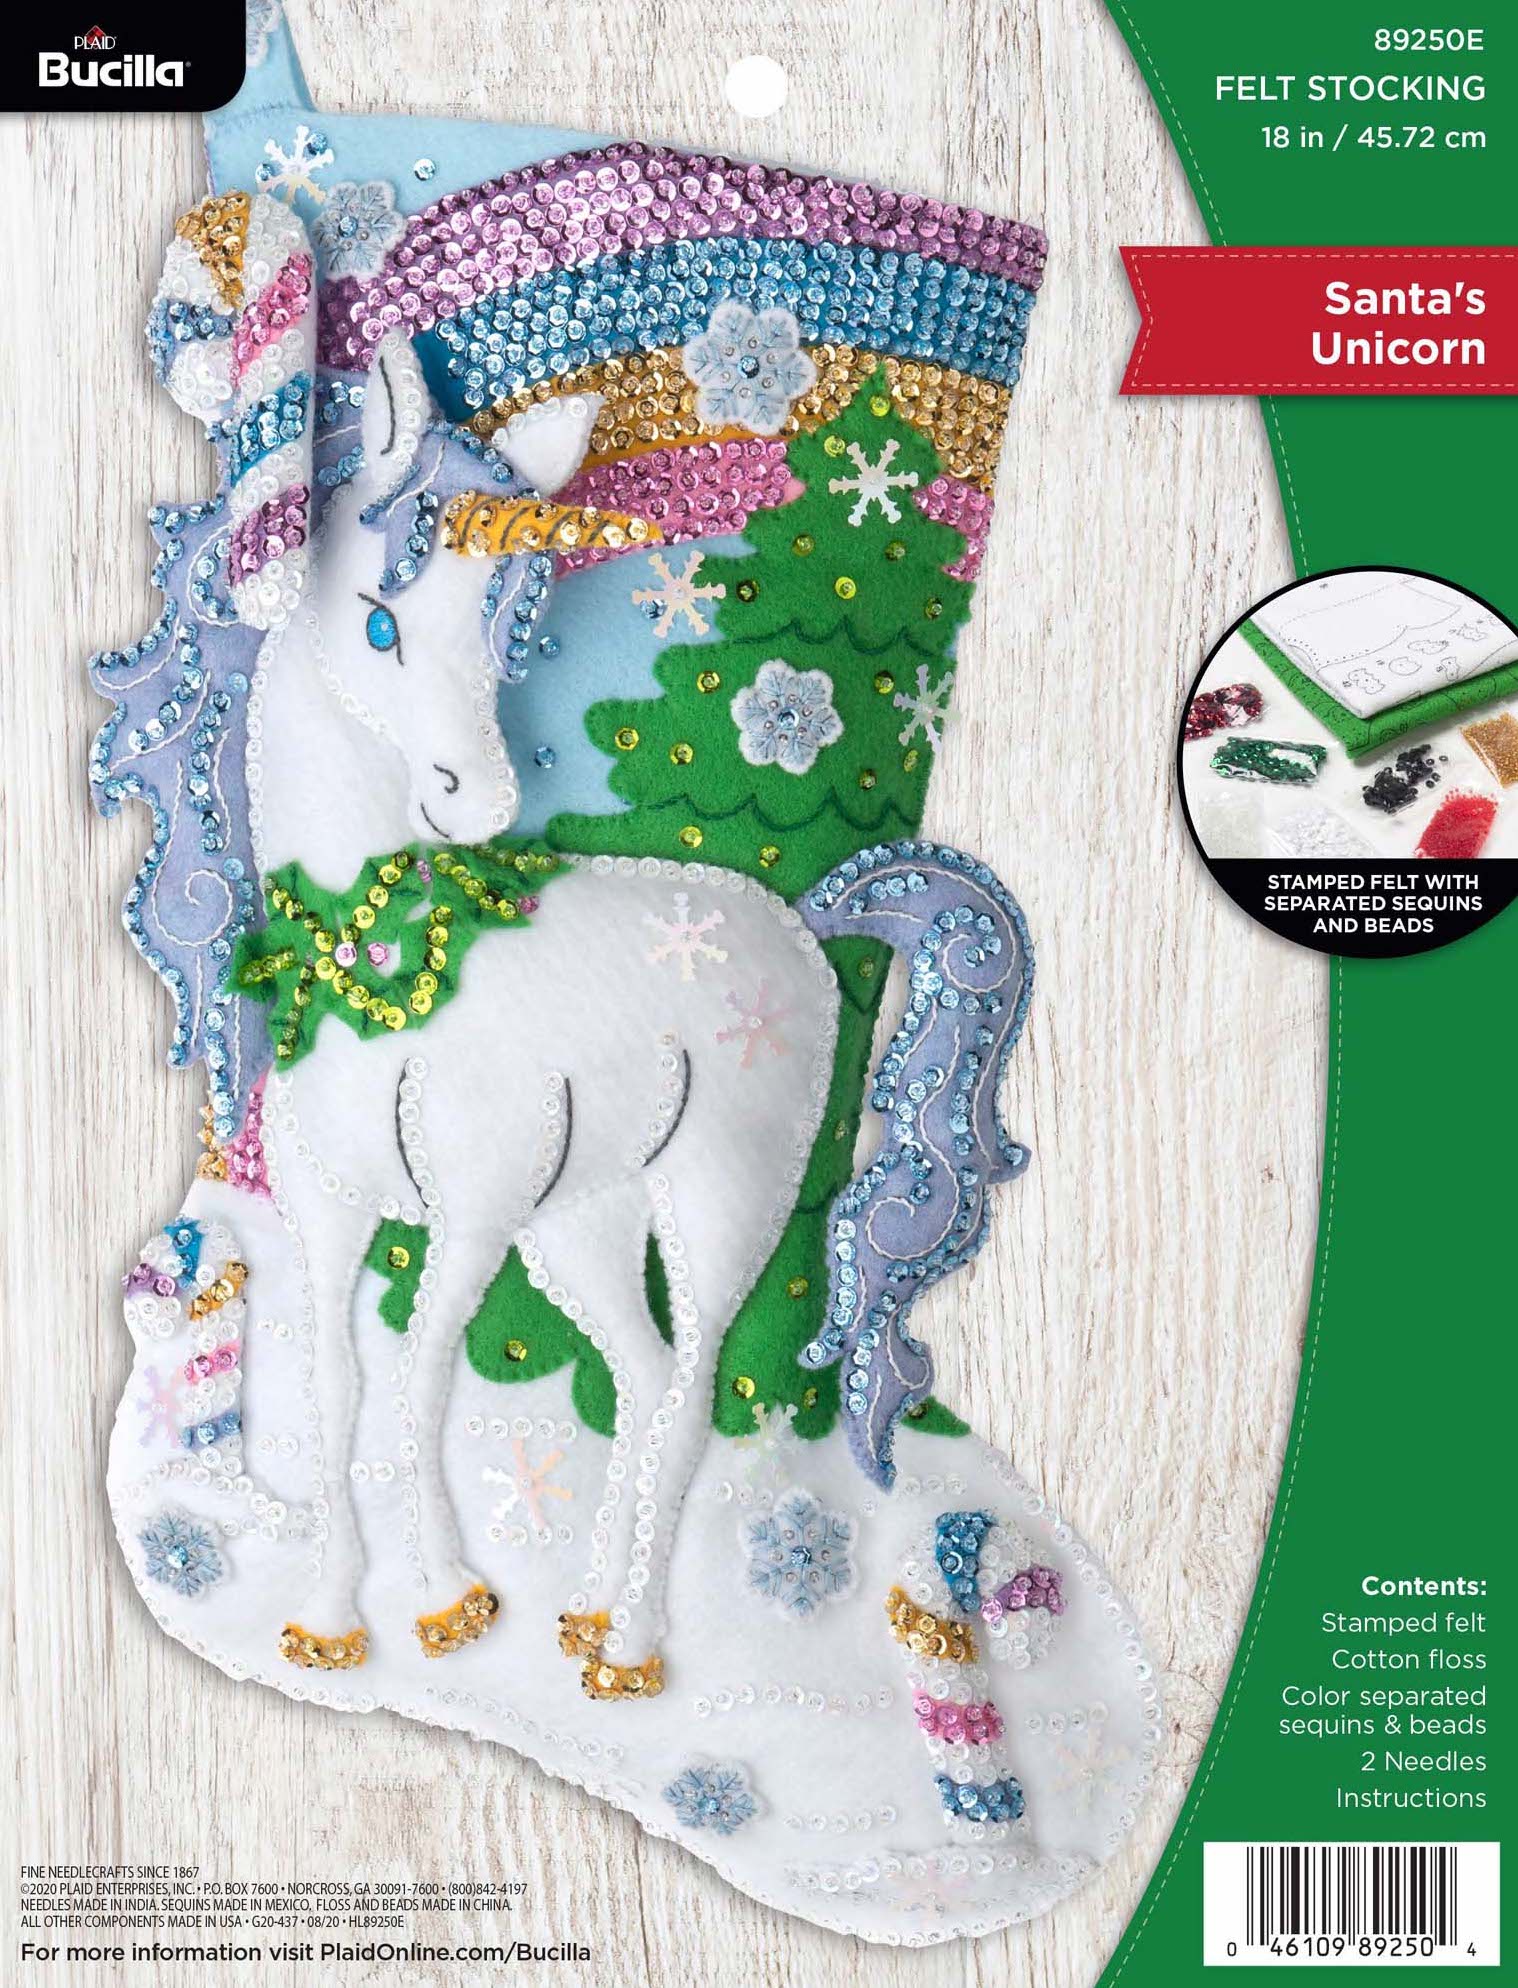 Buy Stocking Pattern Online In India -  India